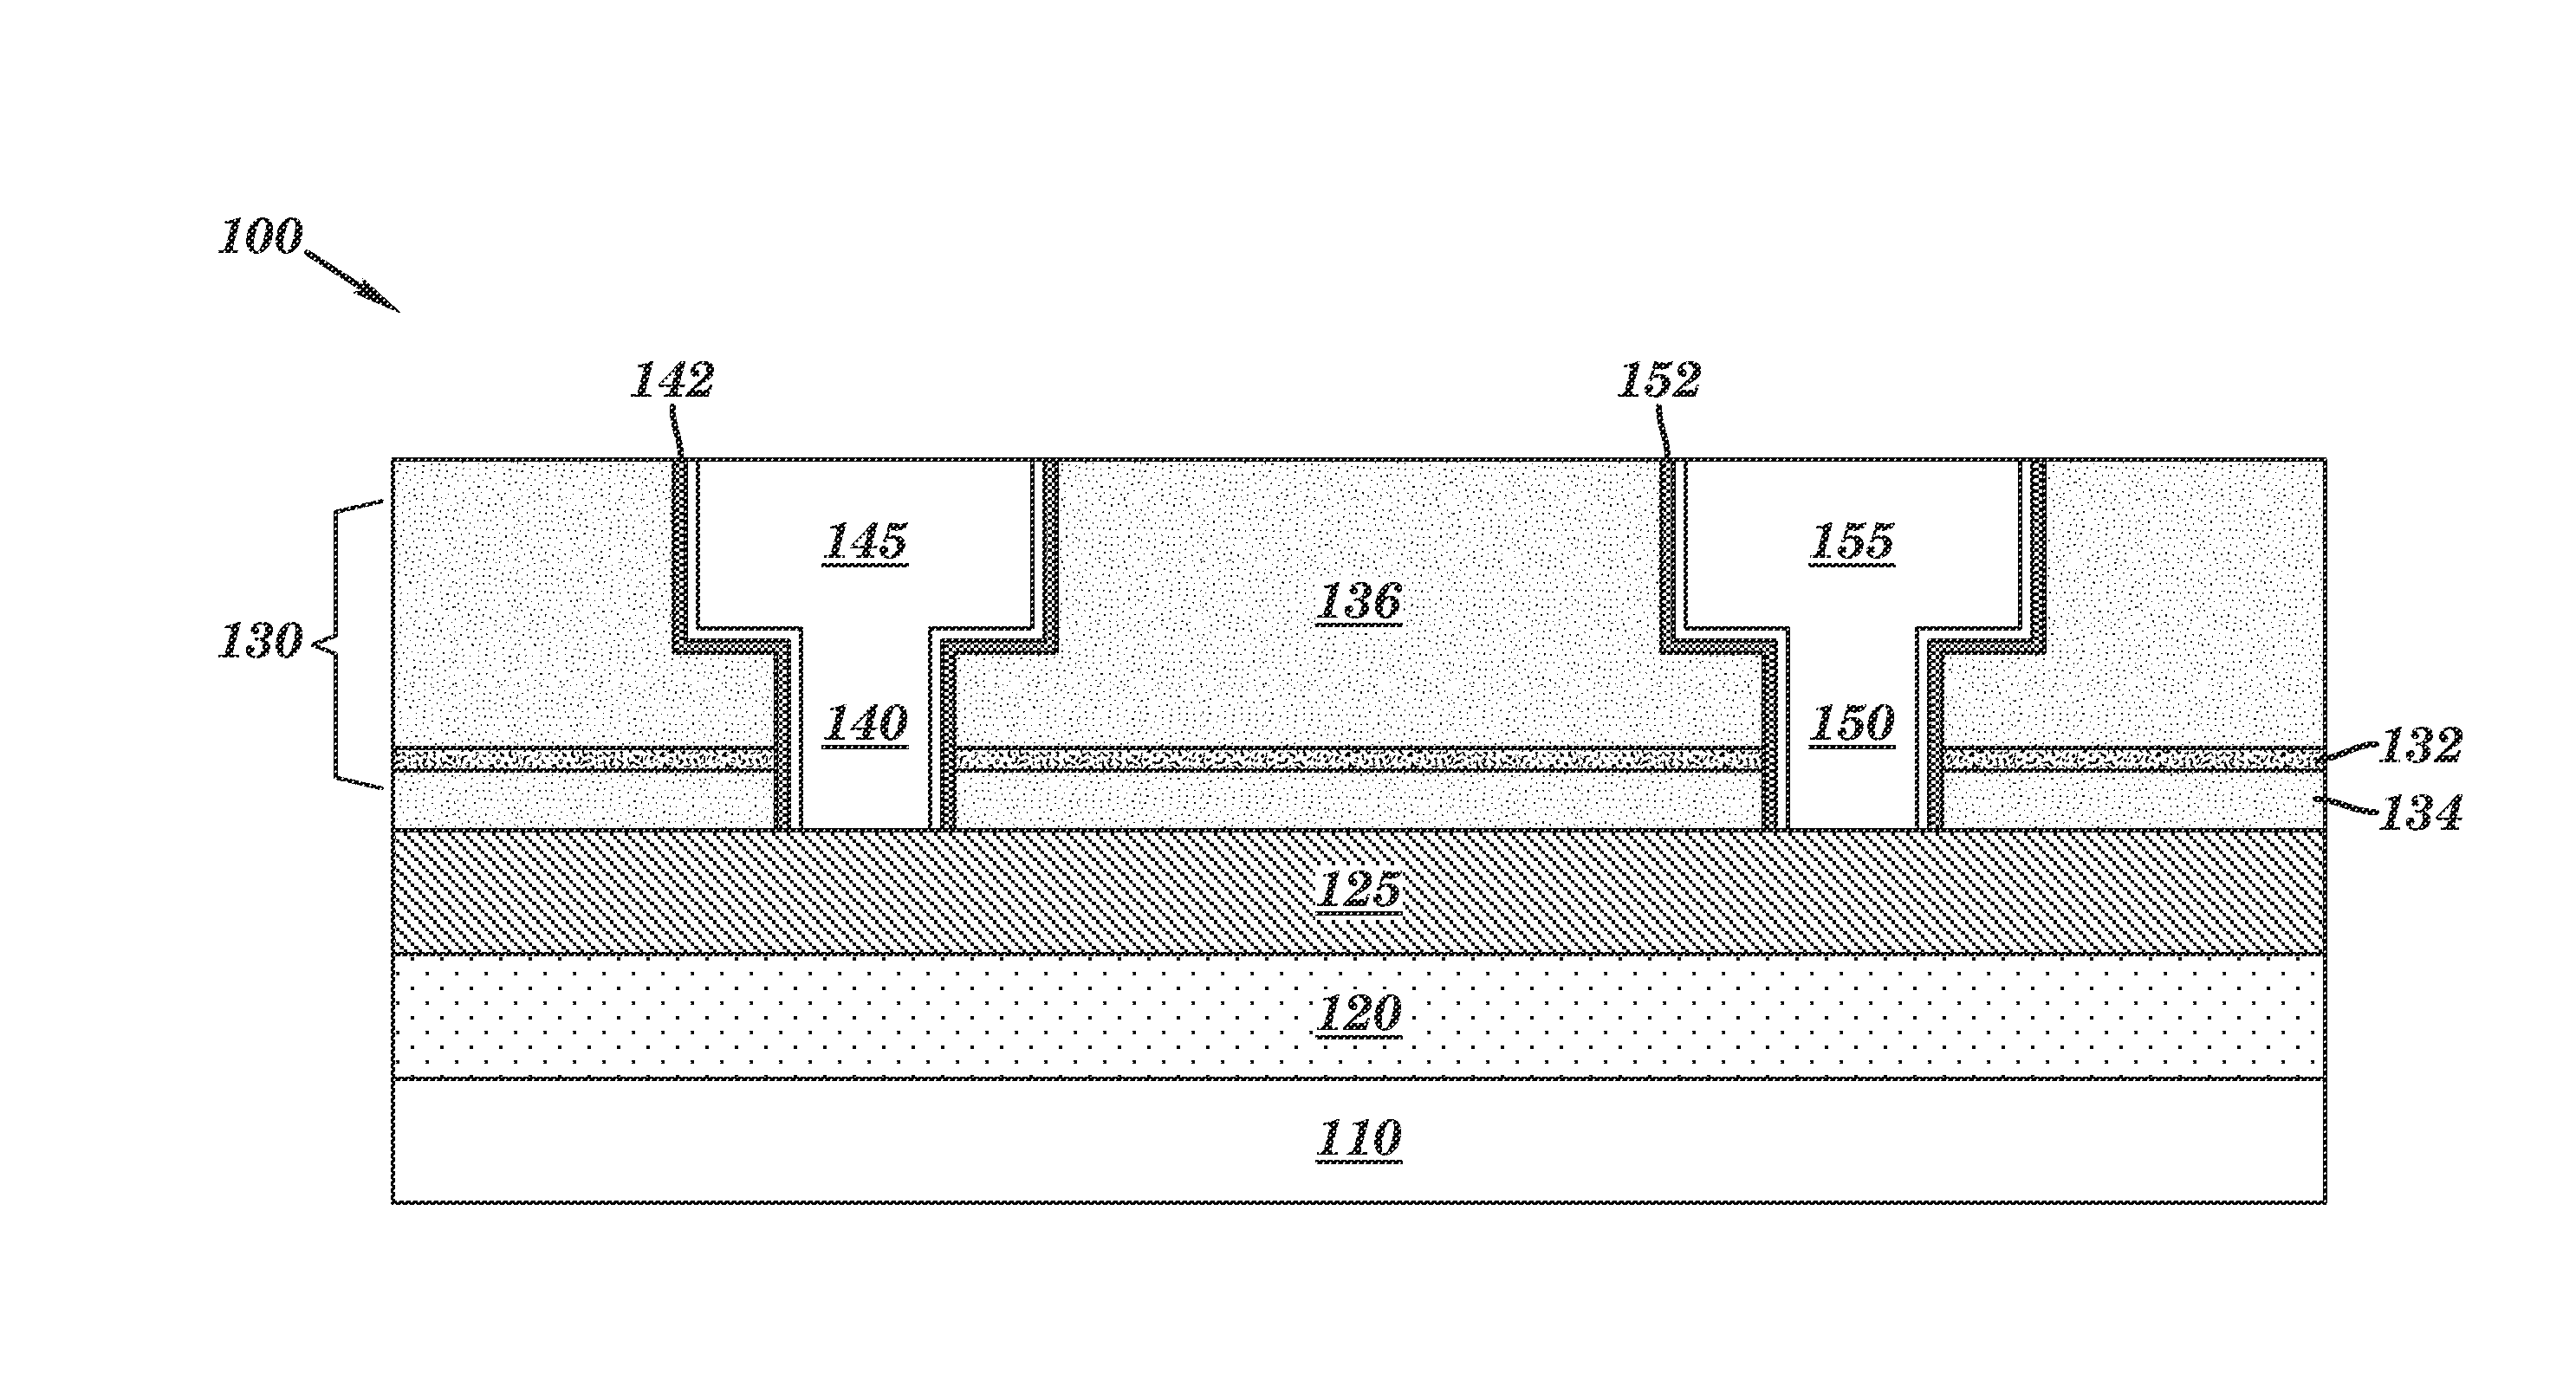 Interlevel Dielectric Stack for Interconnect Structures